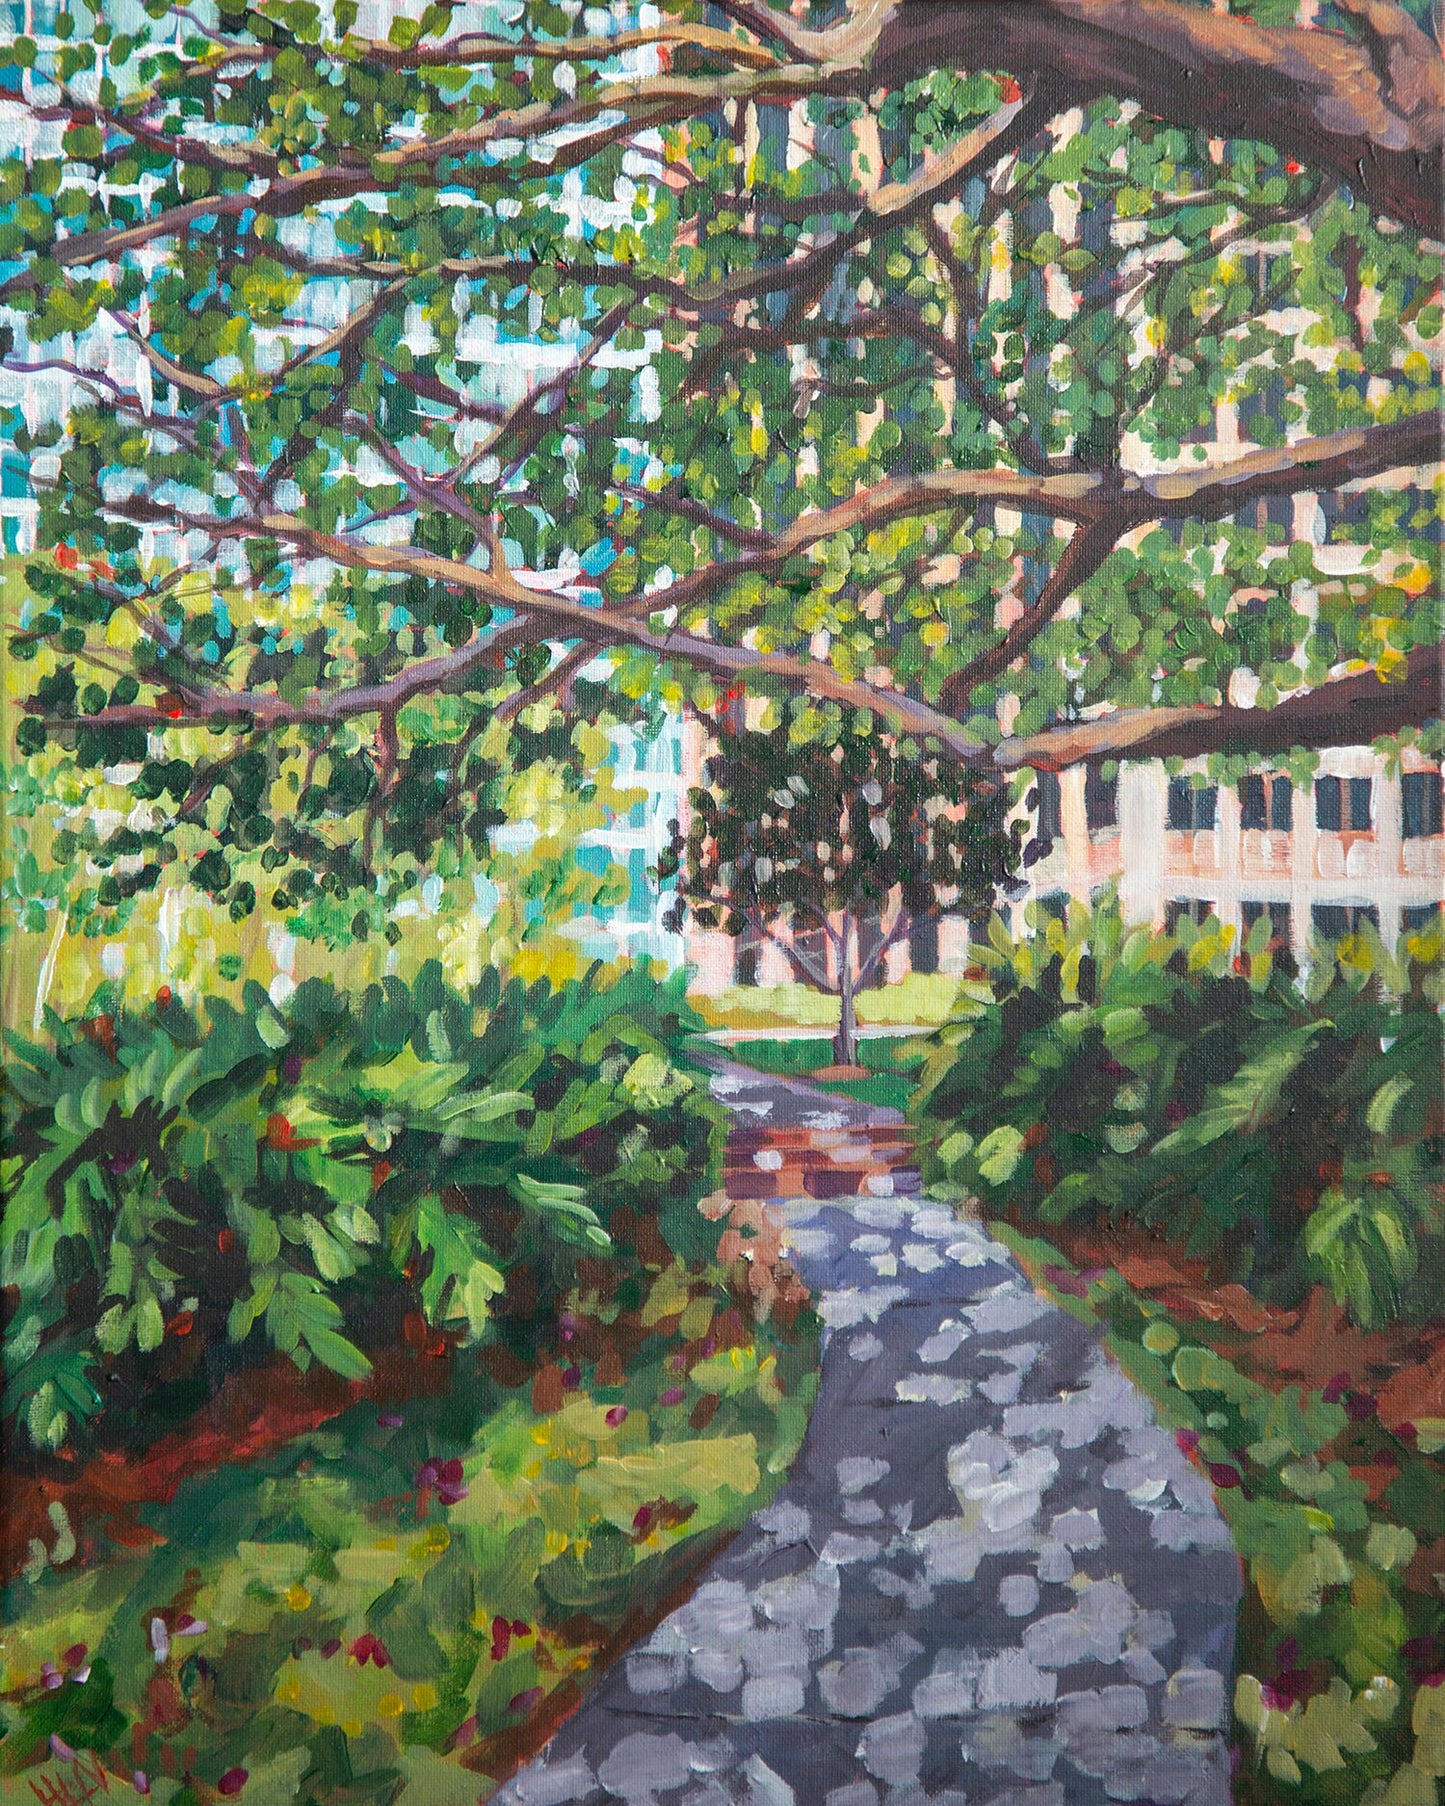 Painting of tree and greenry around Lake Eola Park in downtown Orlando